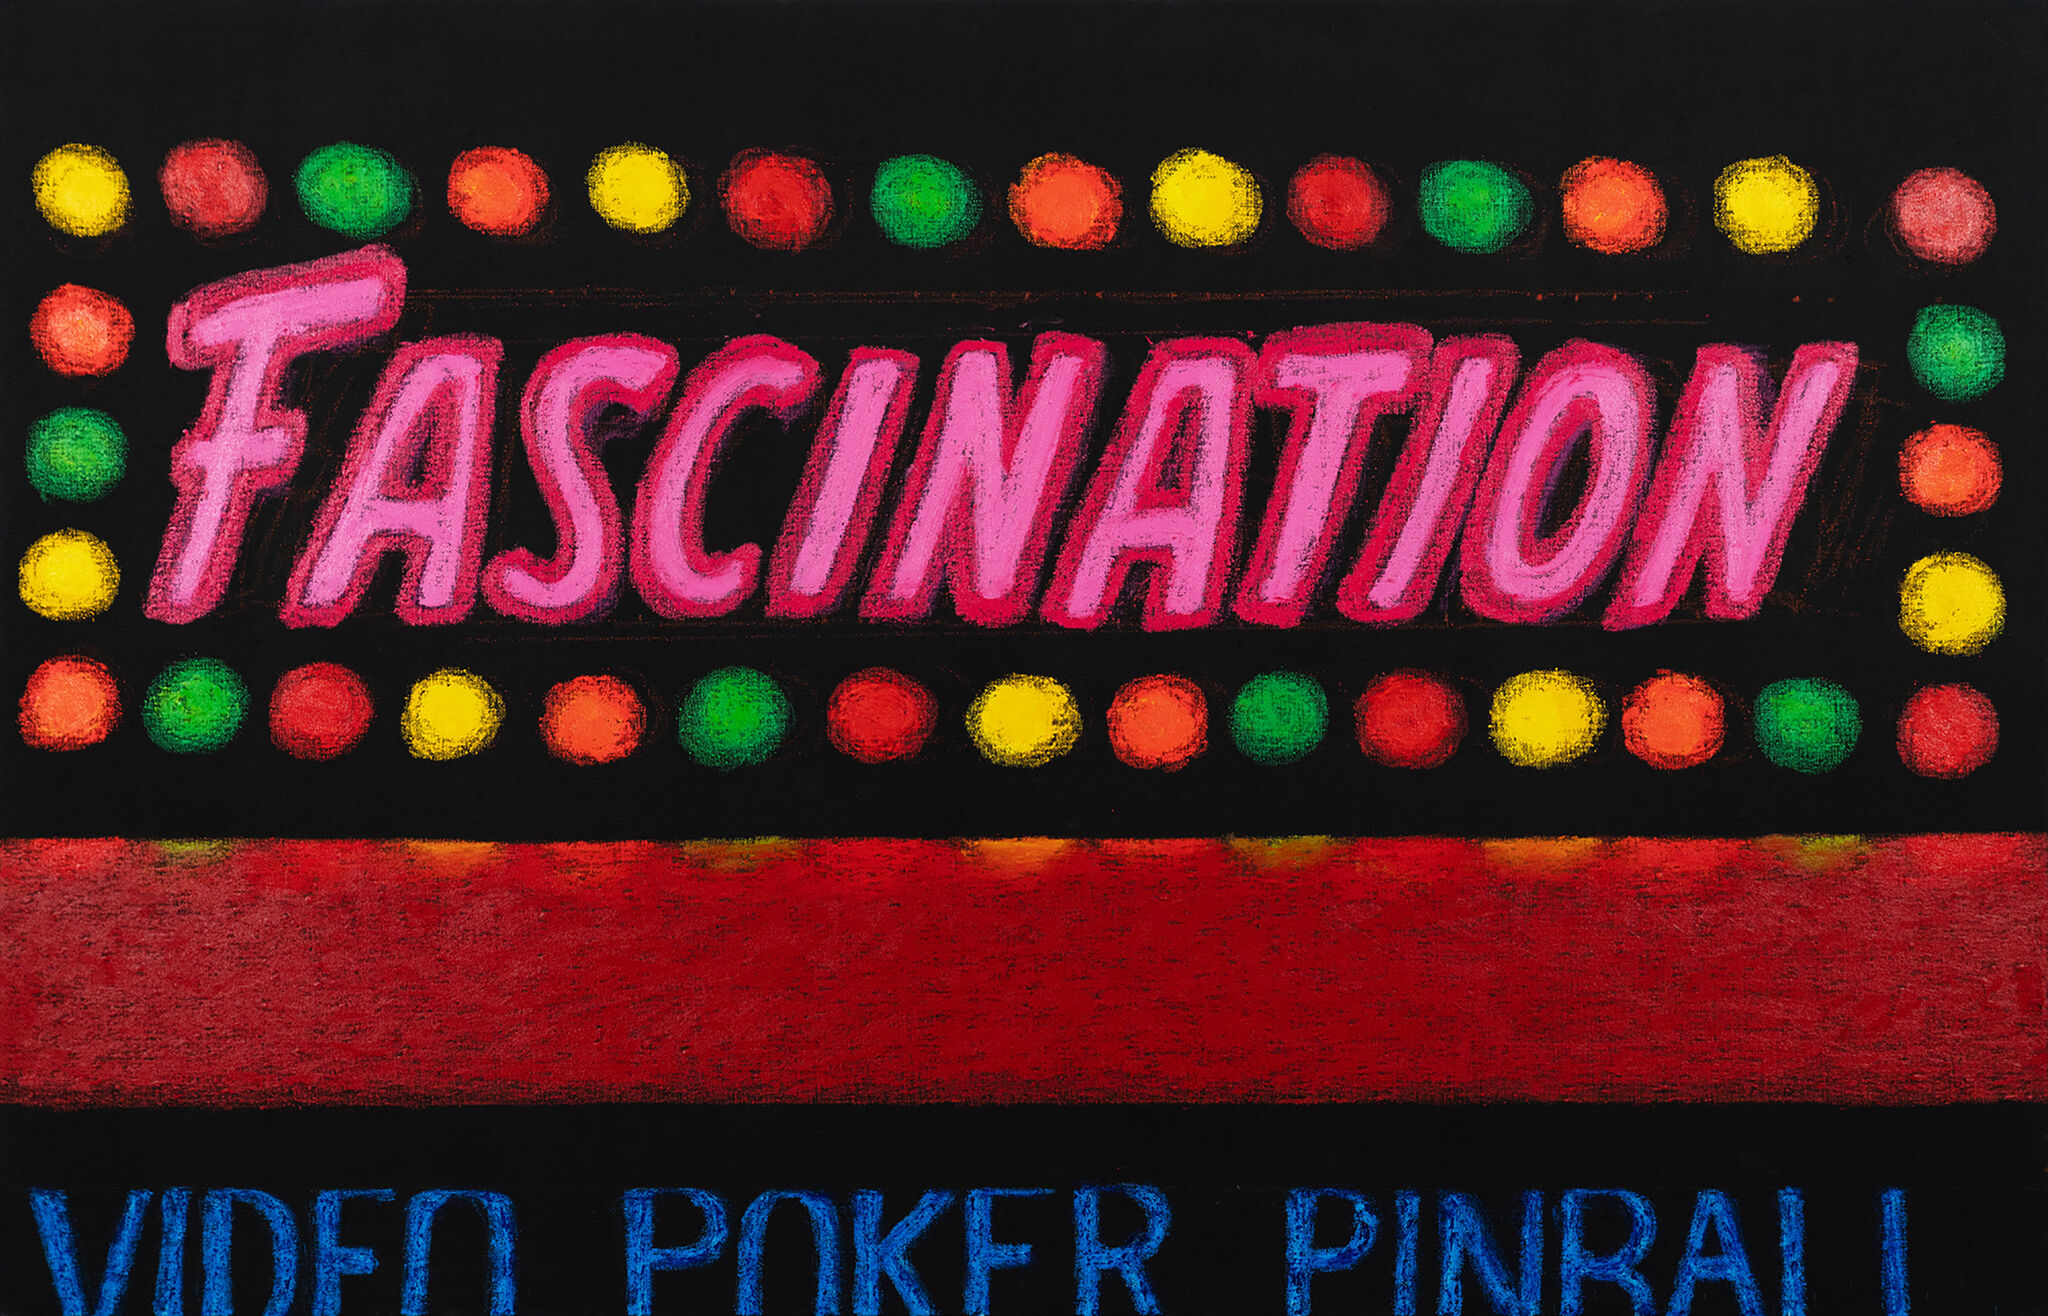 A series of multicolored lights, made to resemble a marquee sign, surrounding the word Fascination written in bold pink.